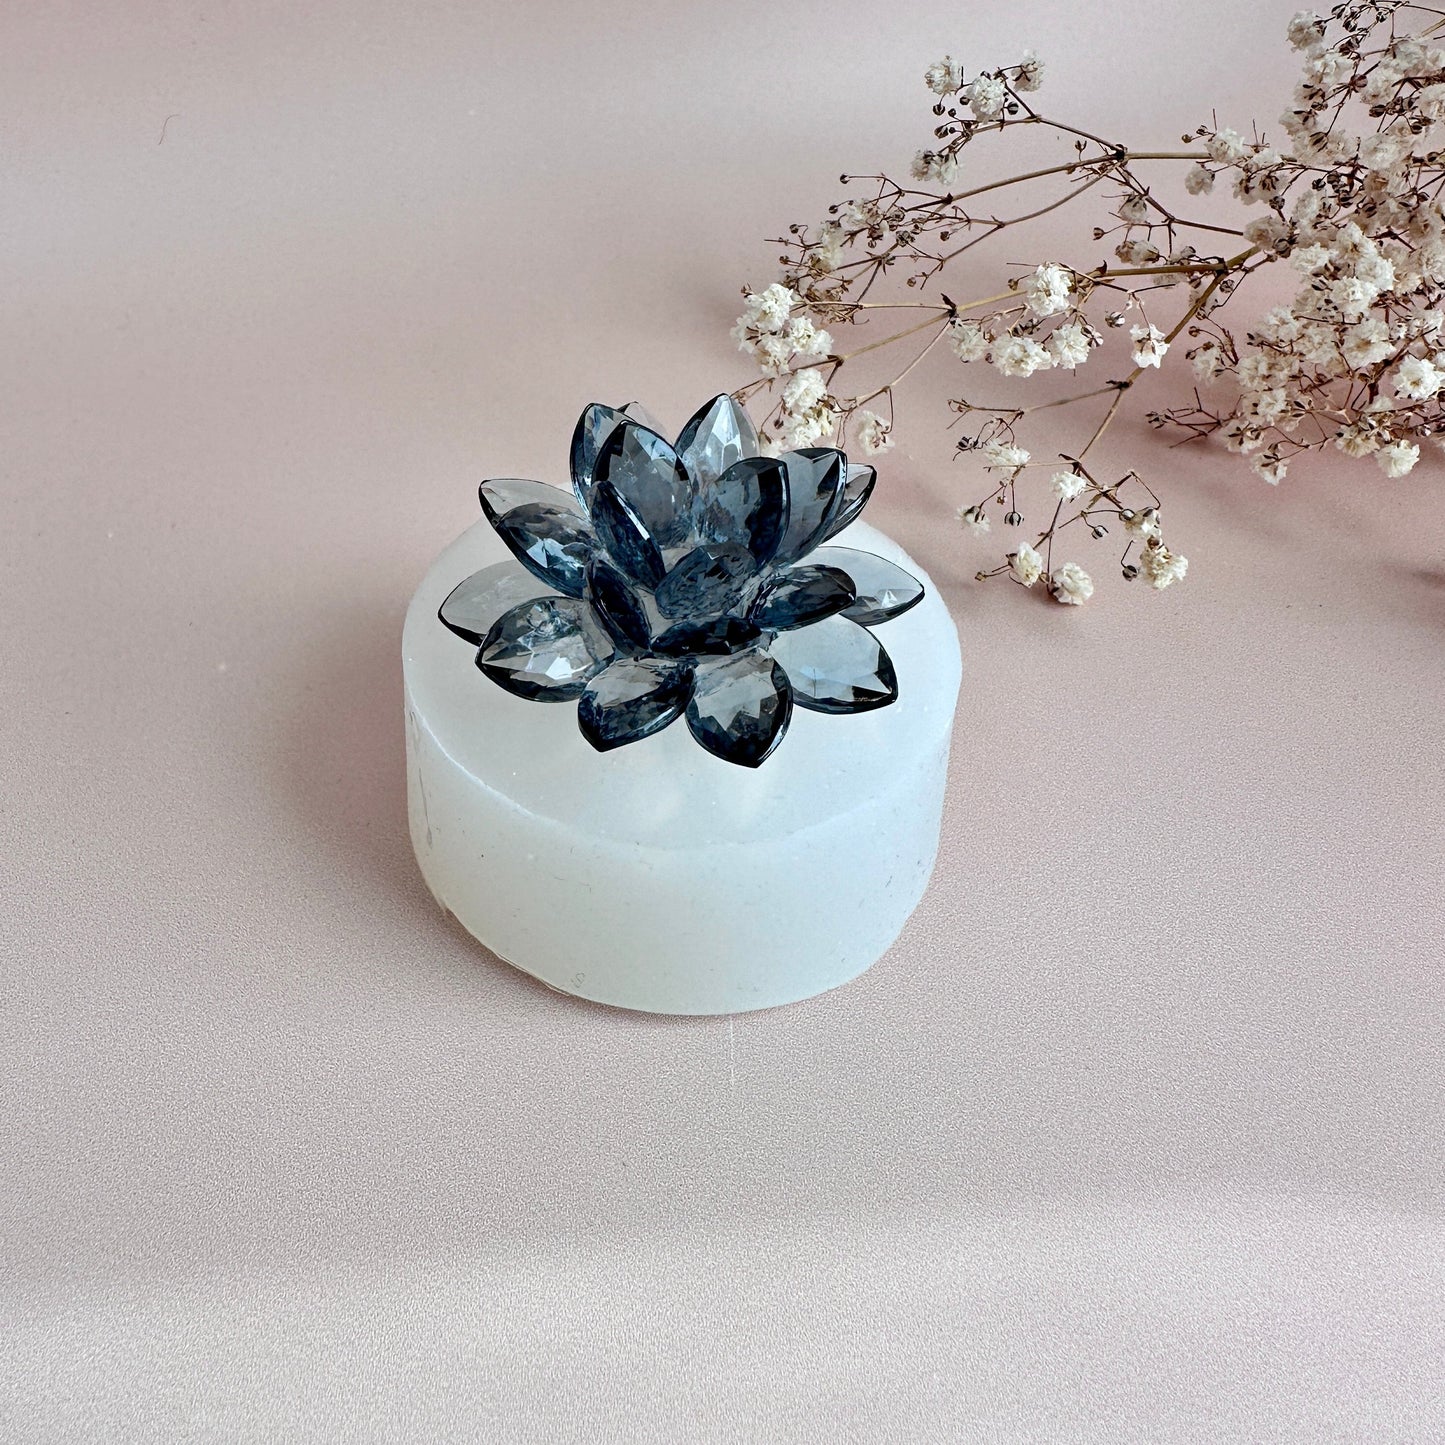 Crafting Delicate Beauty: Crystal Flower Resin Silicone Mold